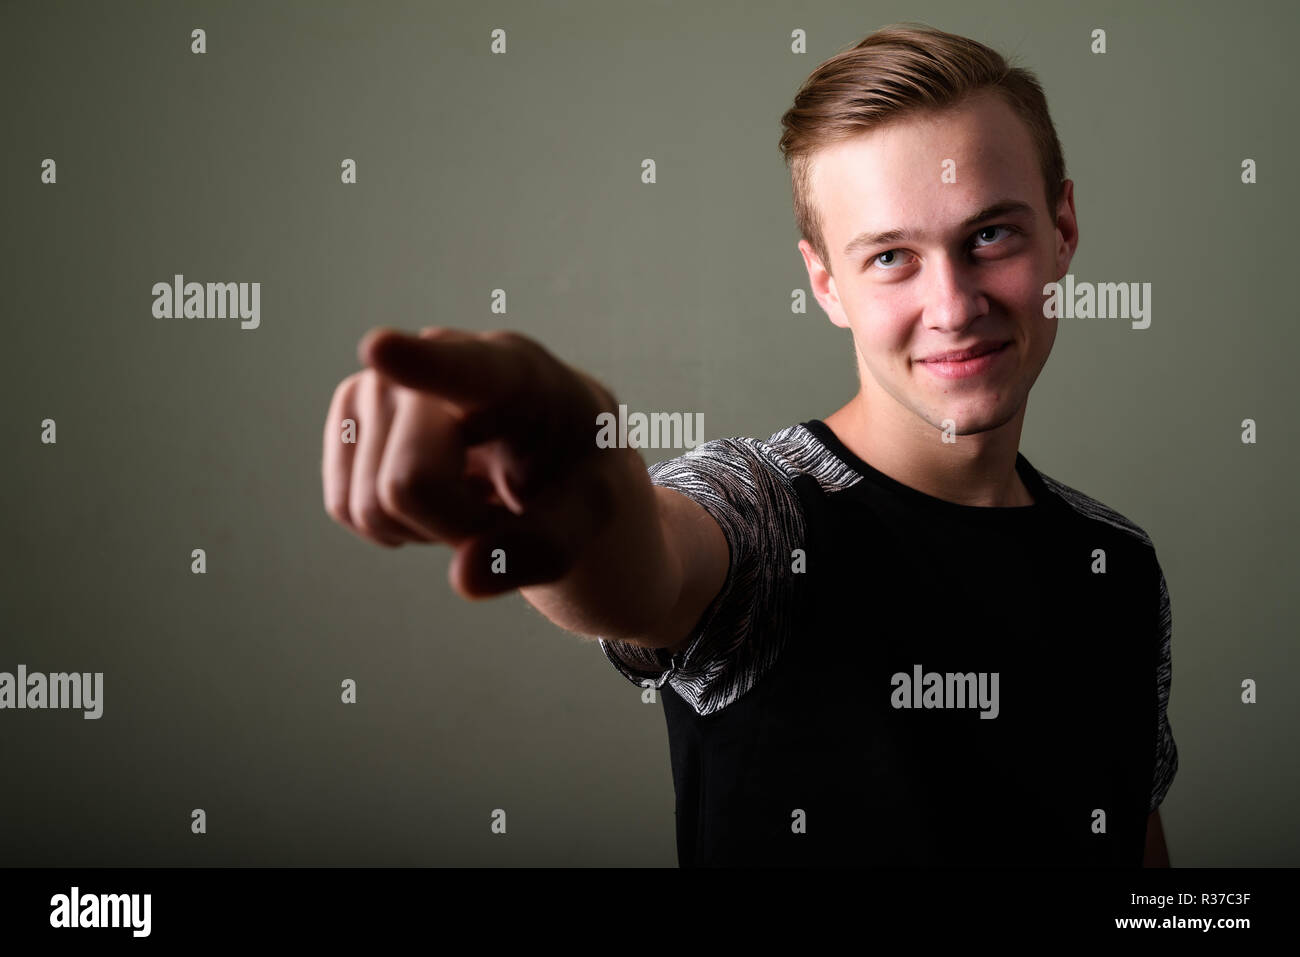 Young handsome man with blond hair against colored background Stock Photo